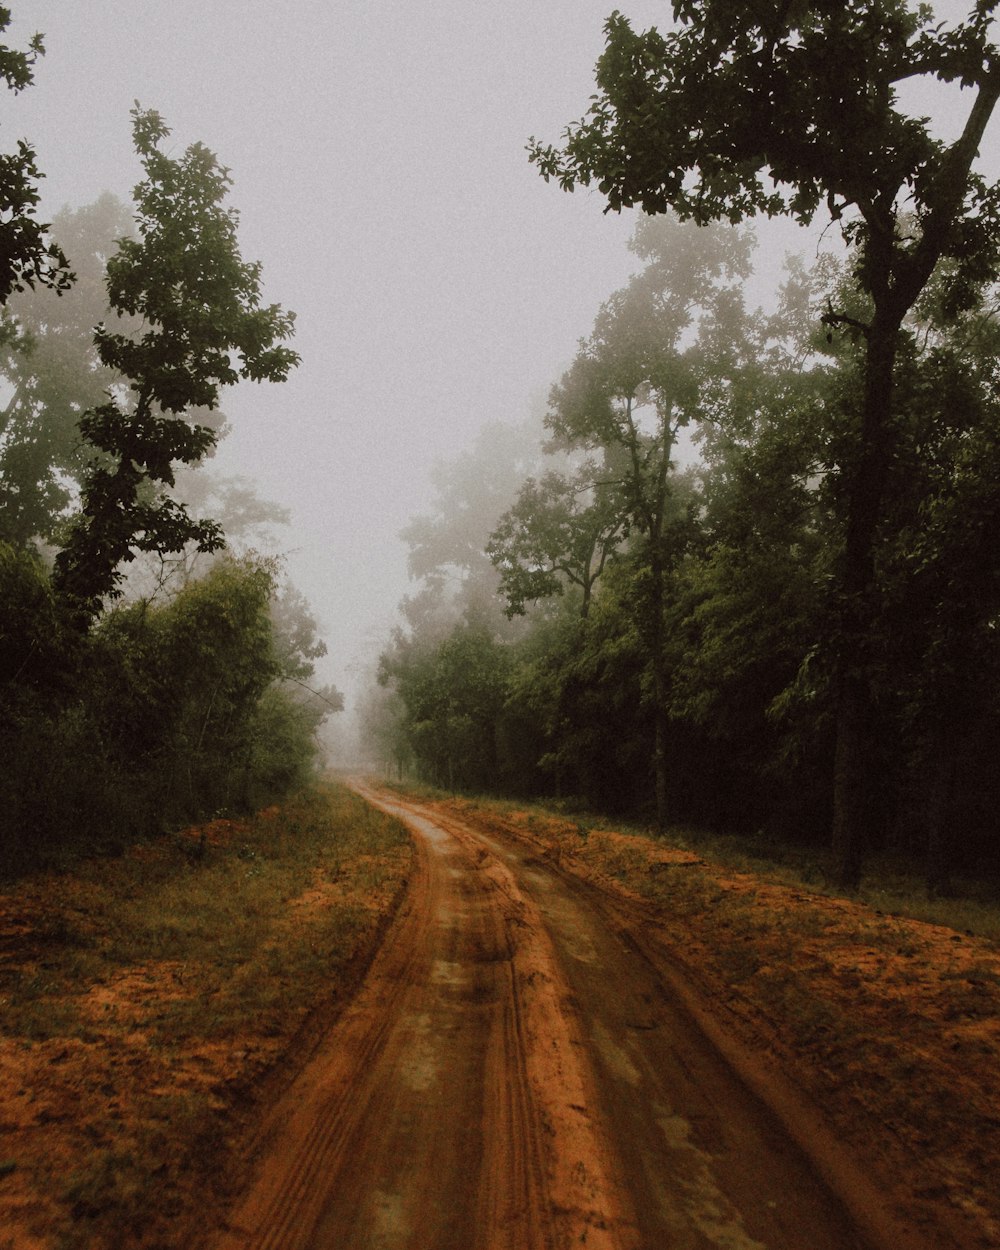 brown dirt road between green trees during foggy day